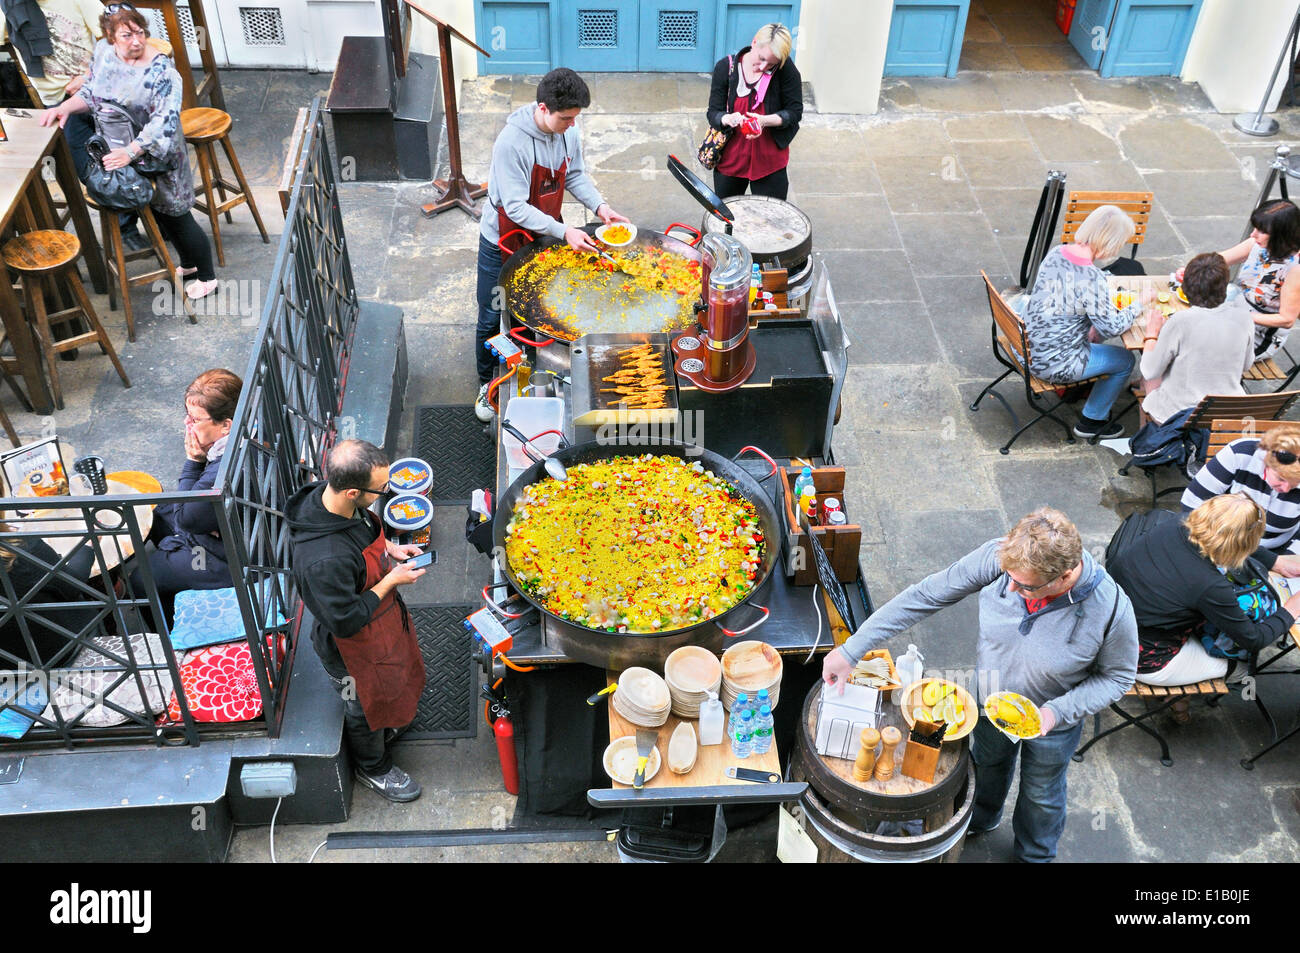 Paella stall in Covent Garden Market building, London, England, UK Stock Photo